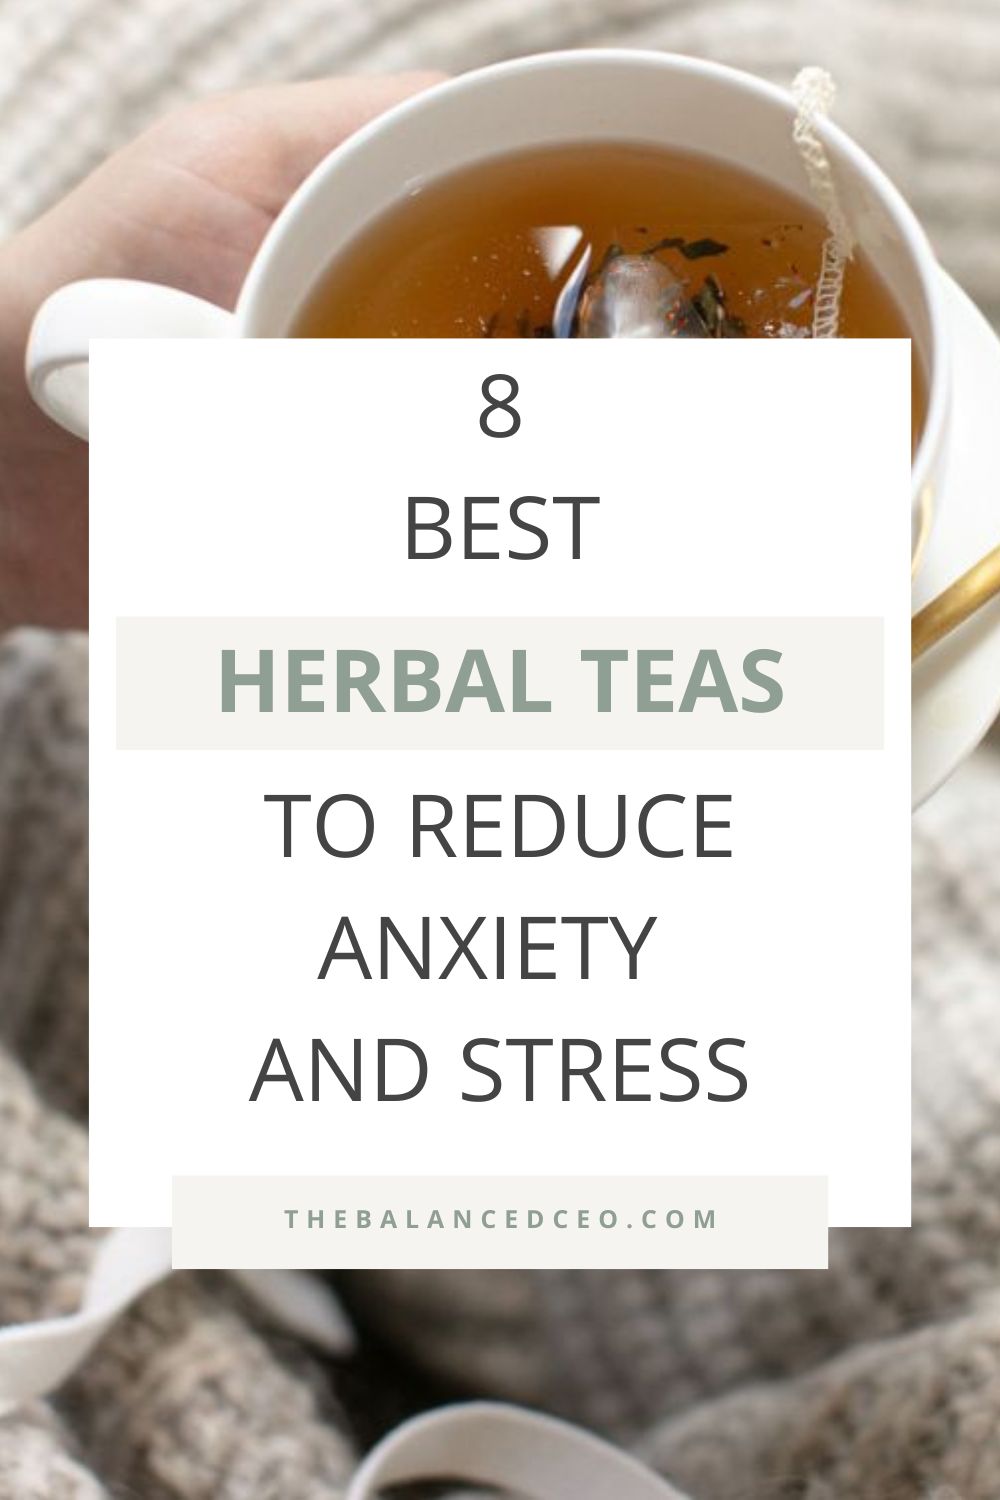 8 Best Herbal Teas to Help Reduce Anxiety and Stress